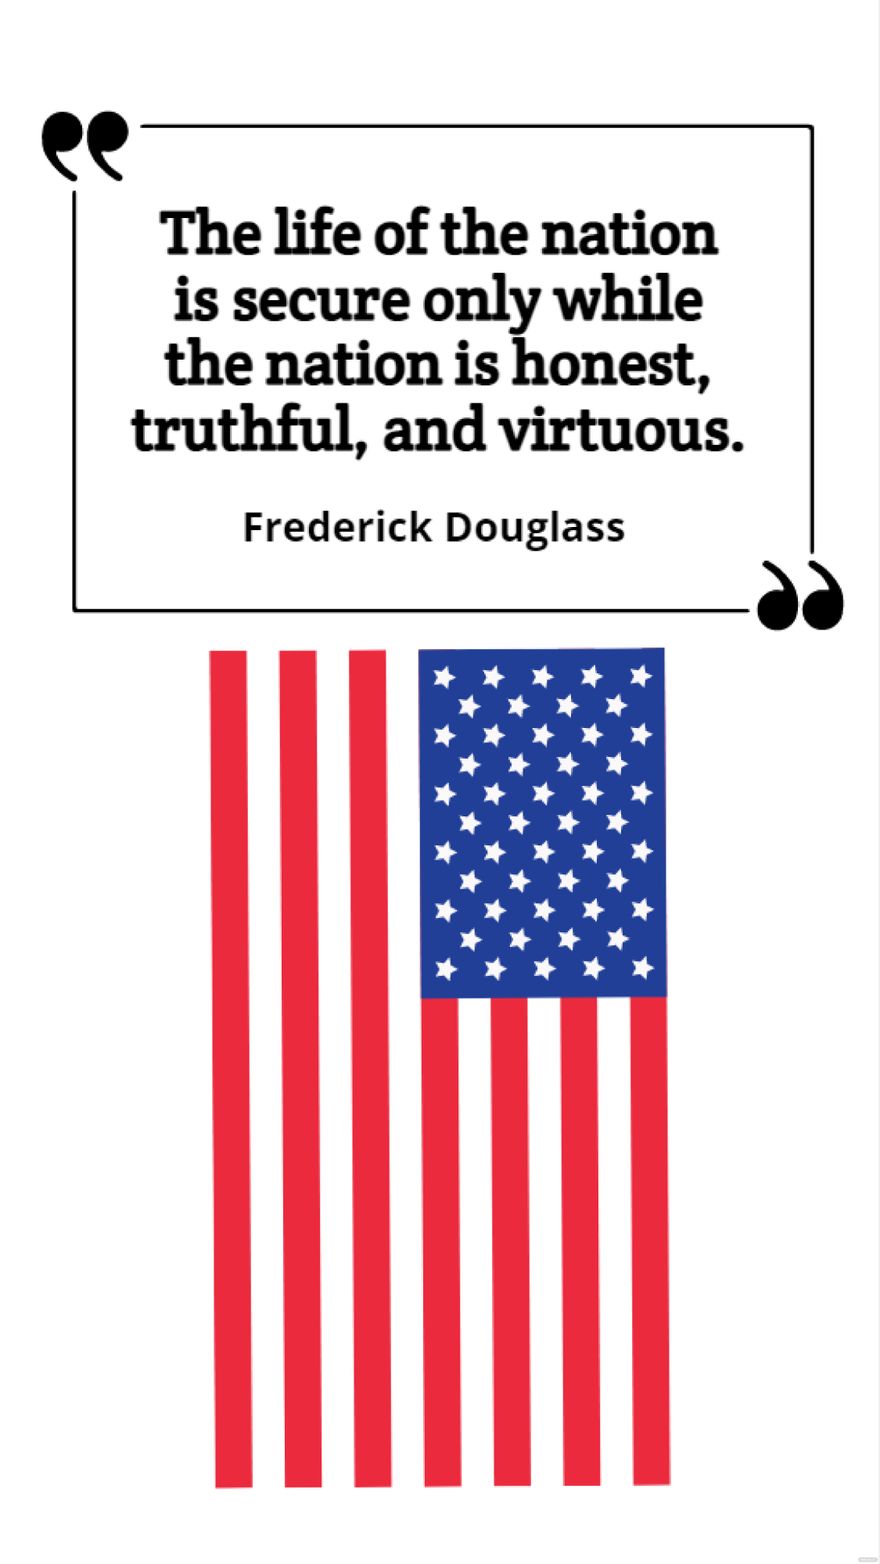 Frederick Douglass - The life of the nation is secure only while the nation is honest, truthful, and virtuous.